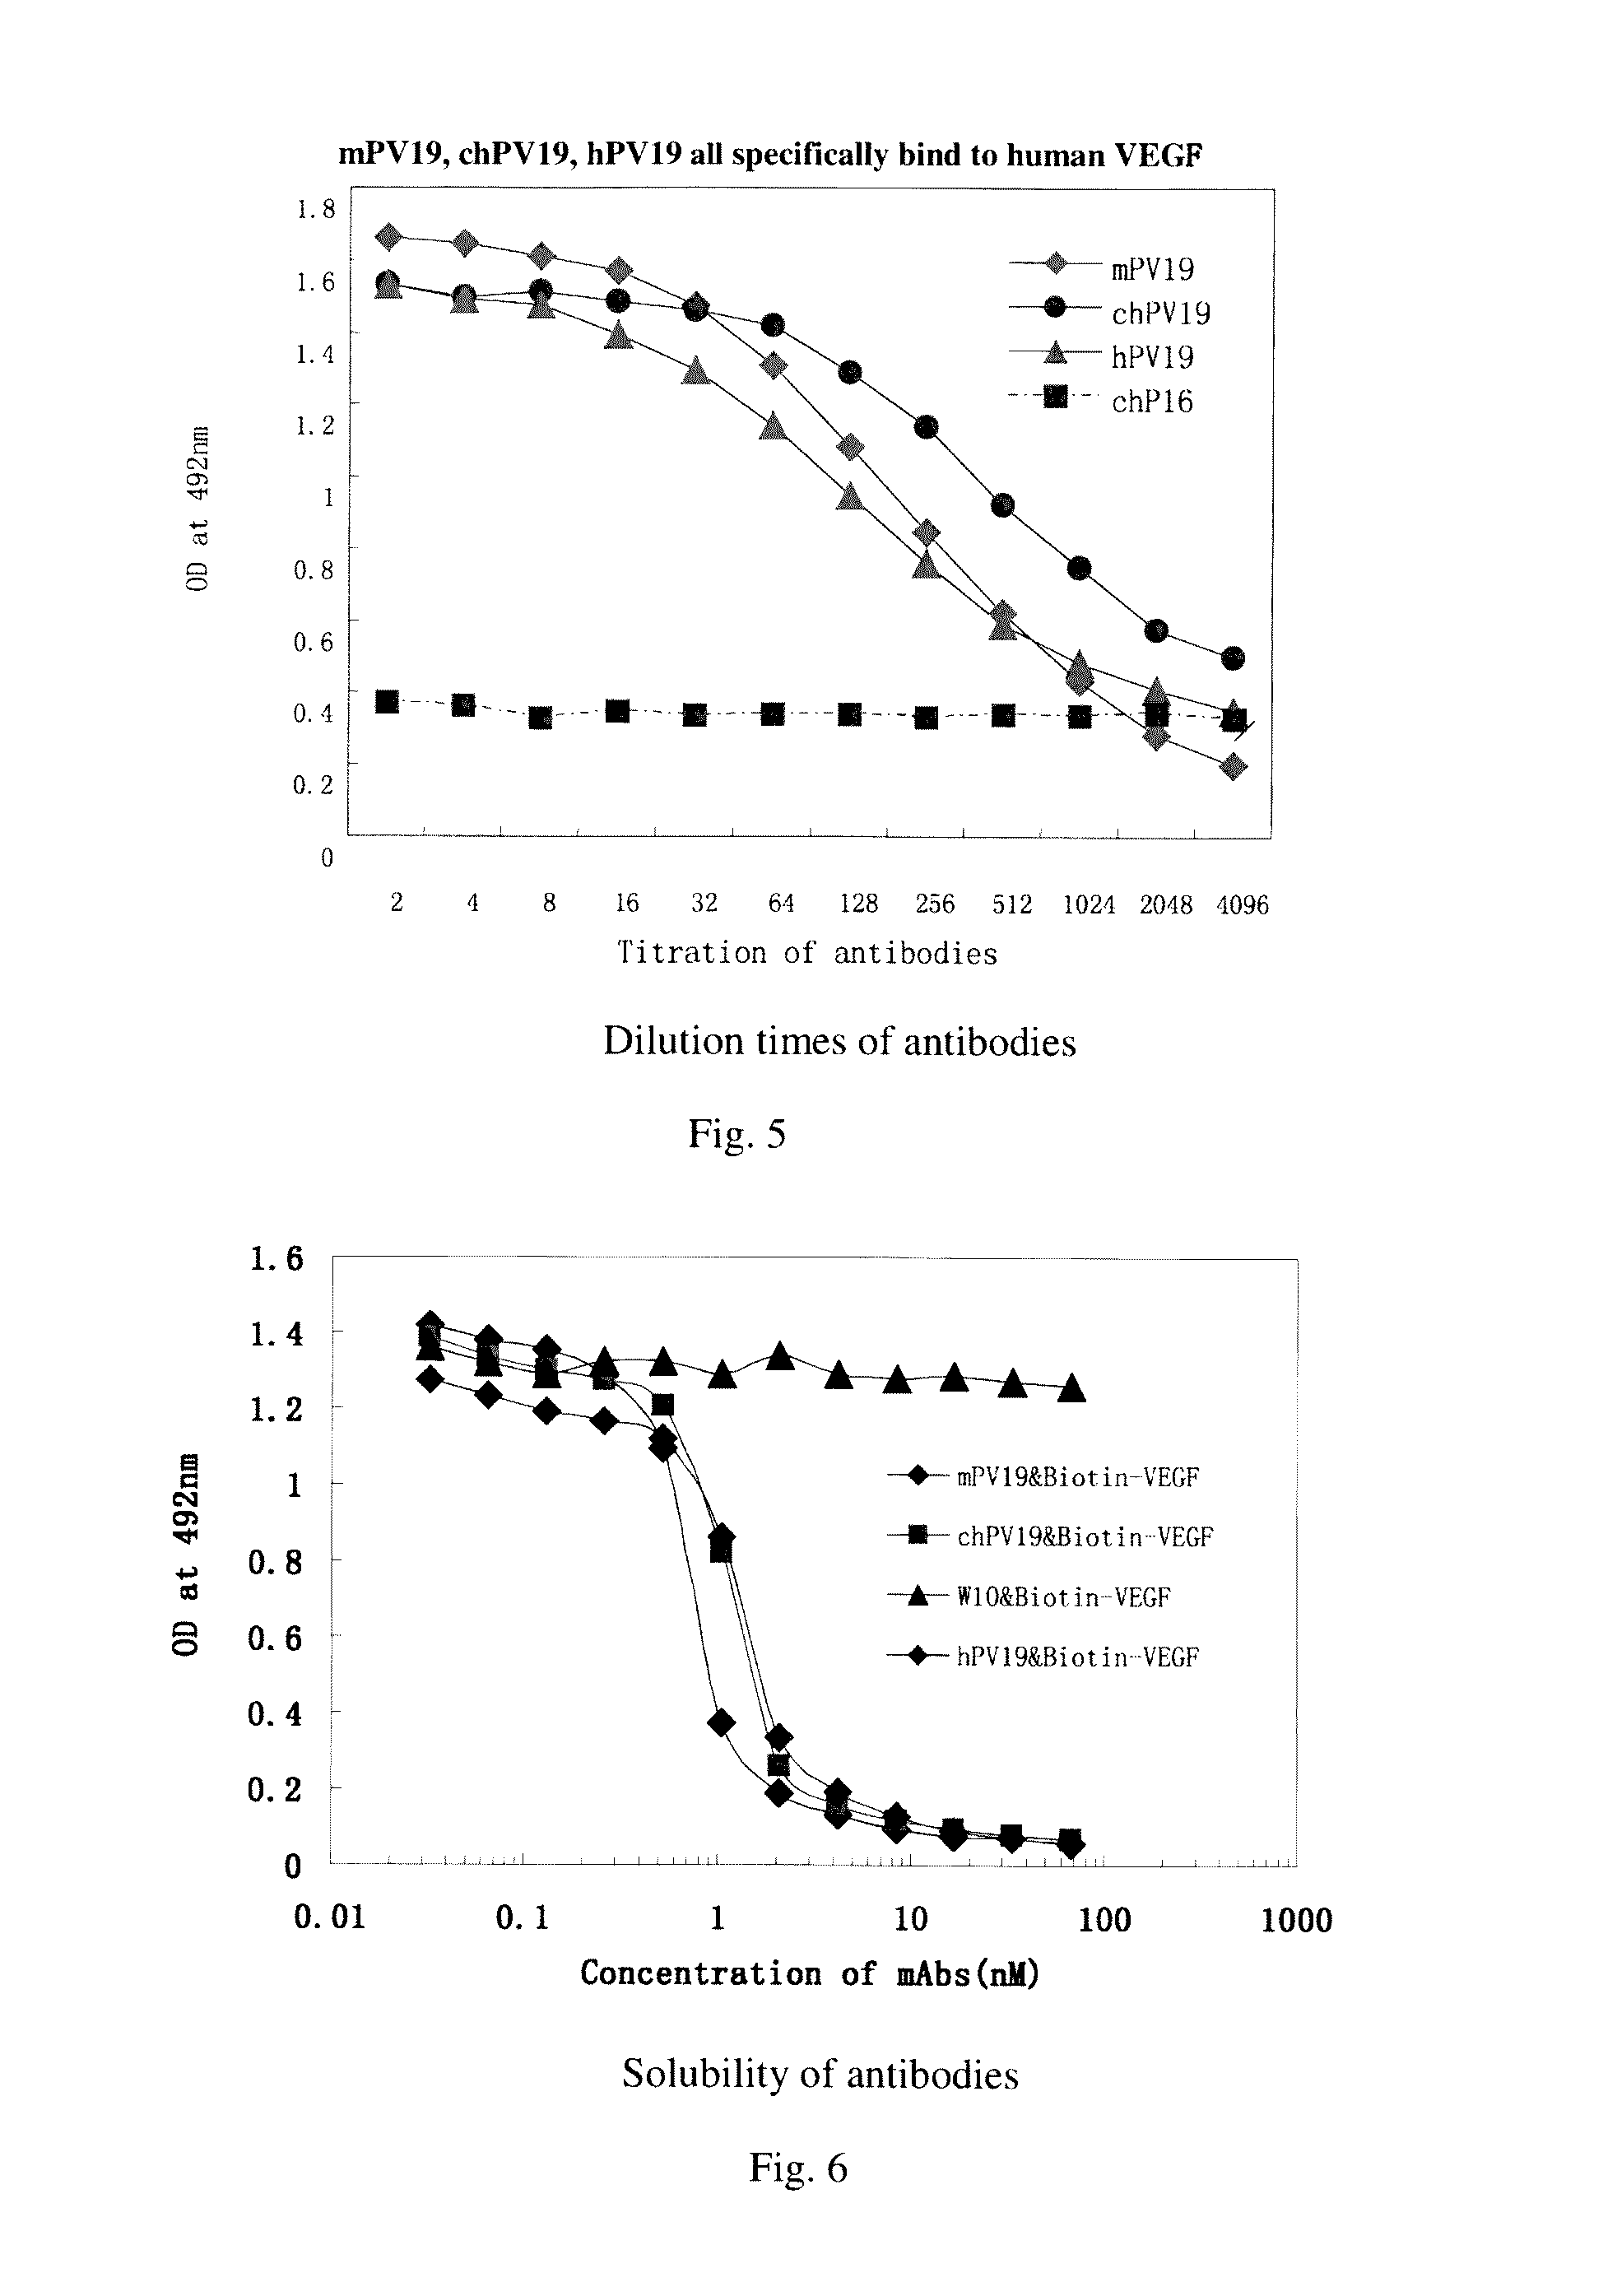 Monoclonal antibody for antagonizing and inhibiting binding of vascular endothelial growth factor to its receptor, and coding sequence